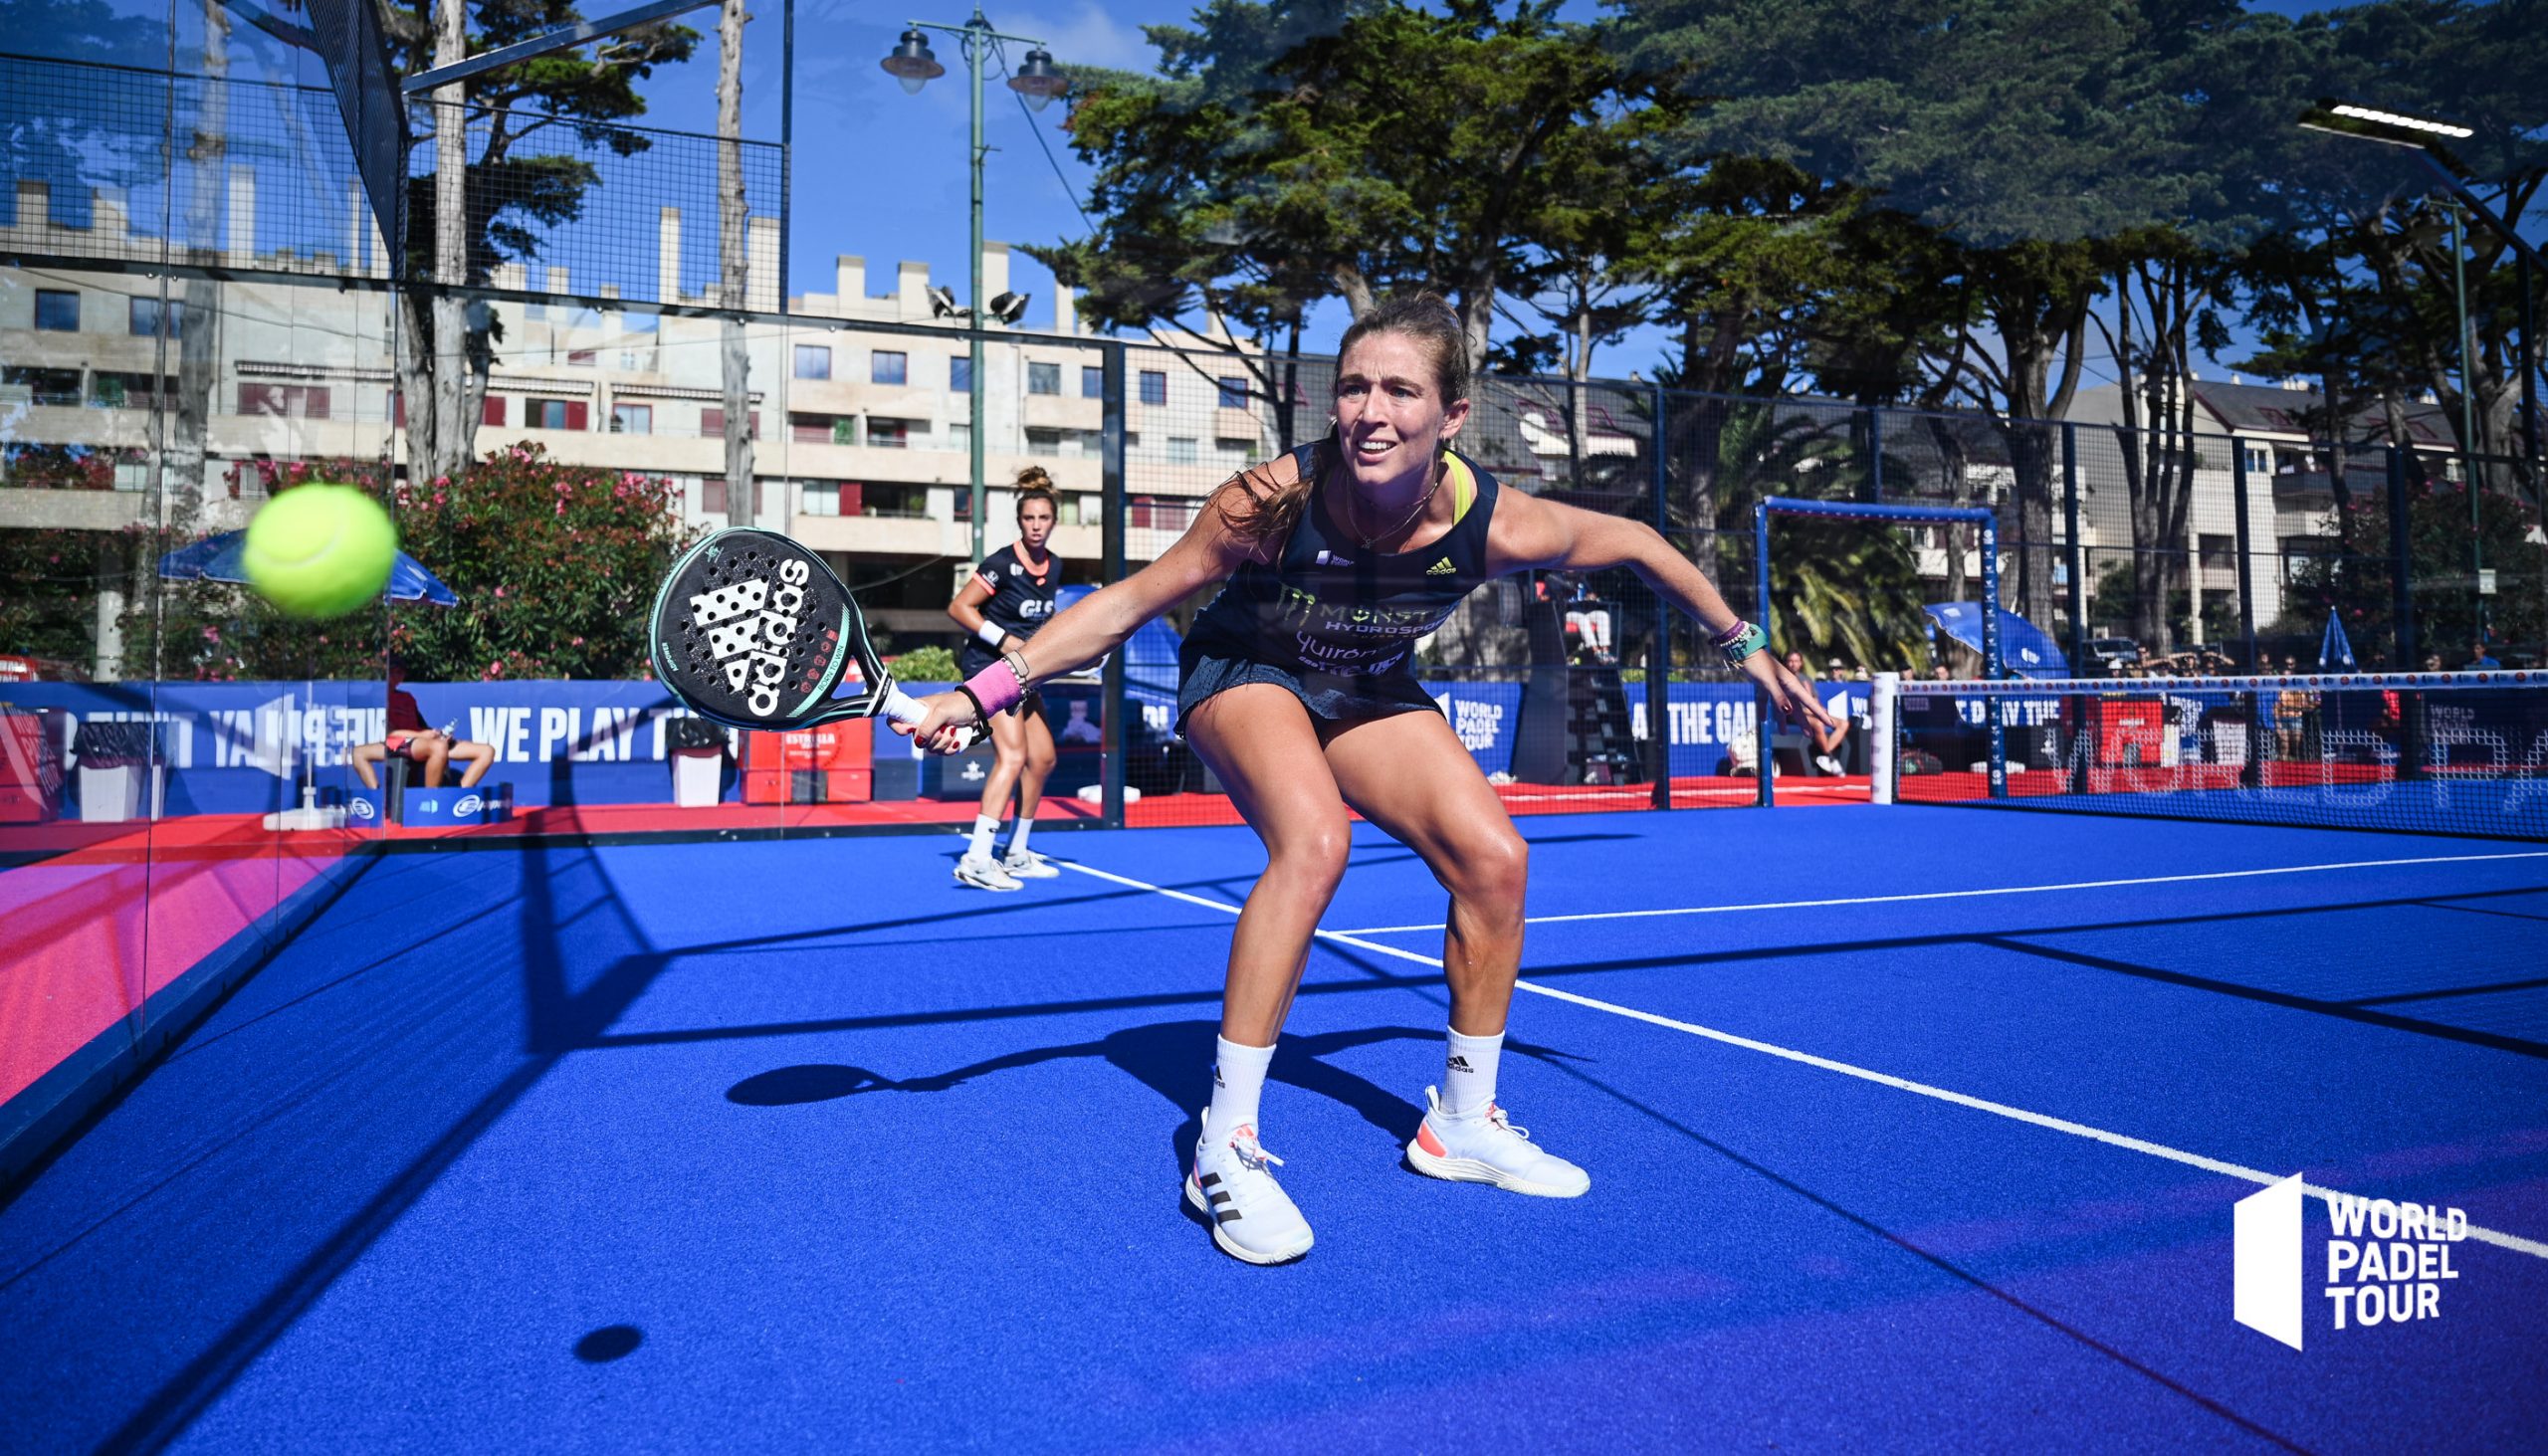 Top seeds engaged in epic battles in Cascais Open quarter-finals